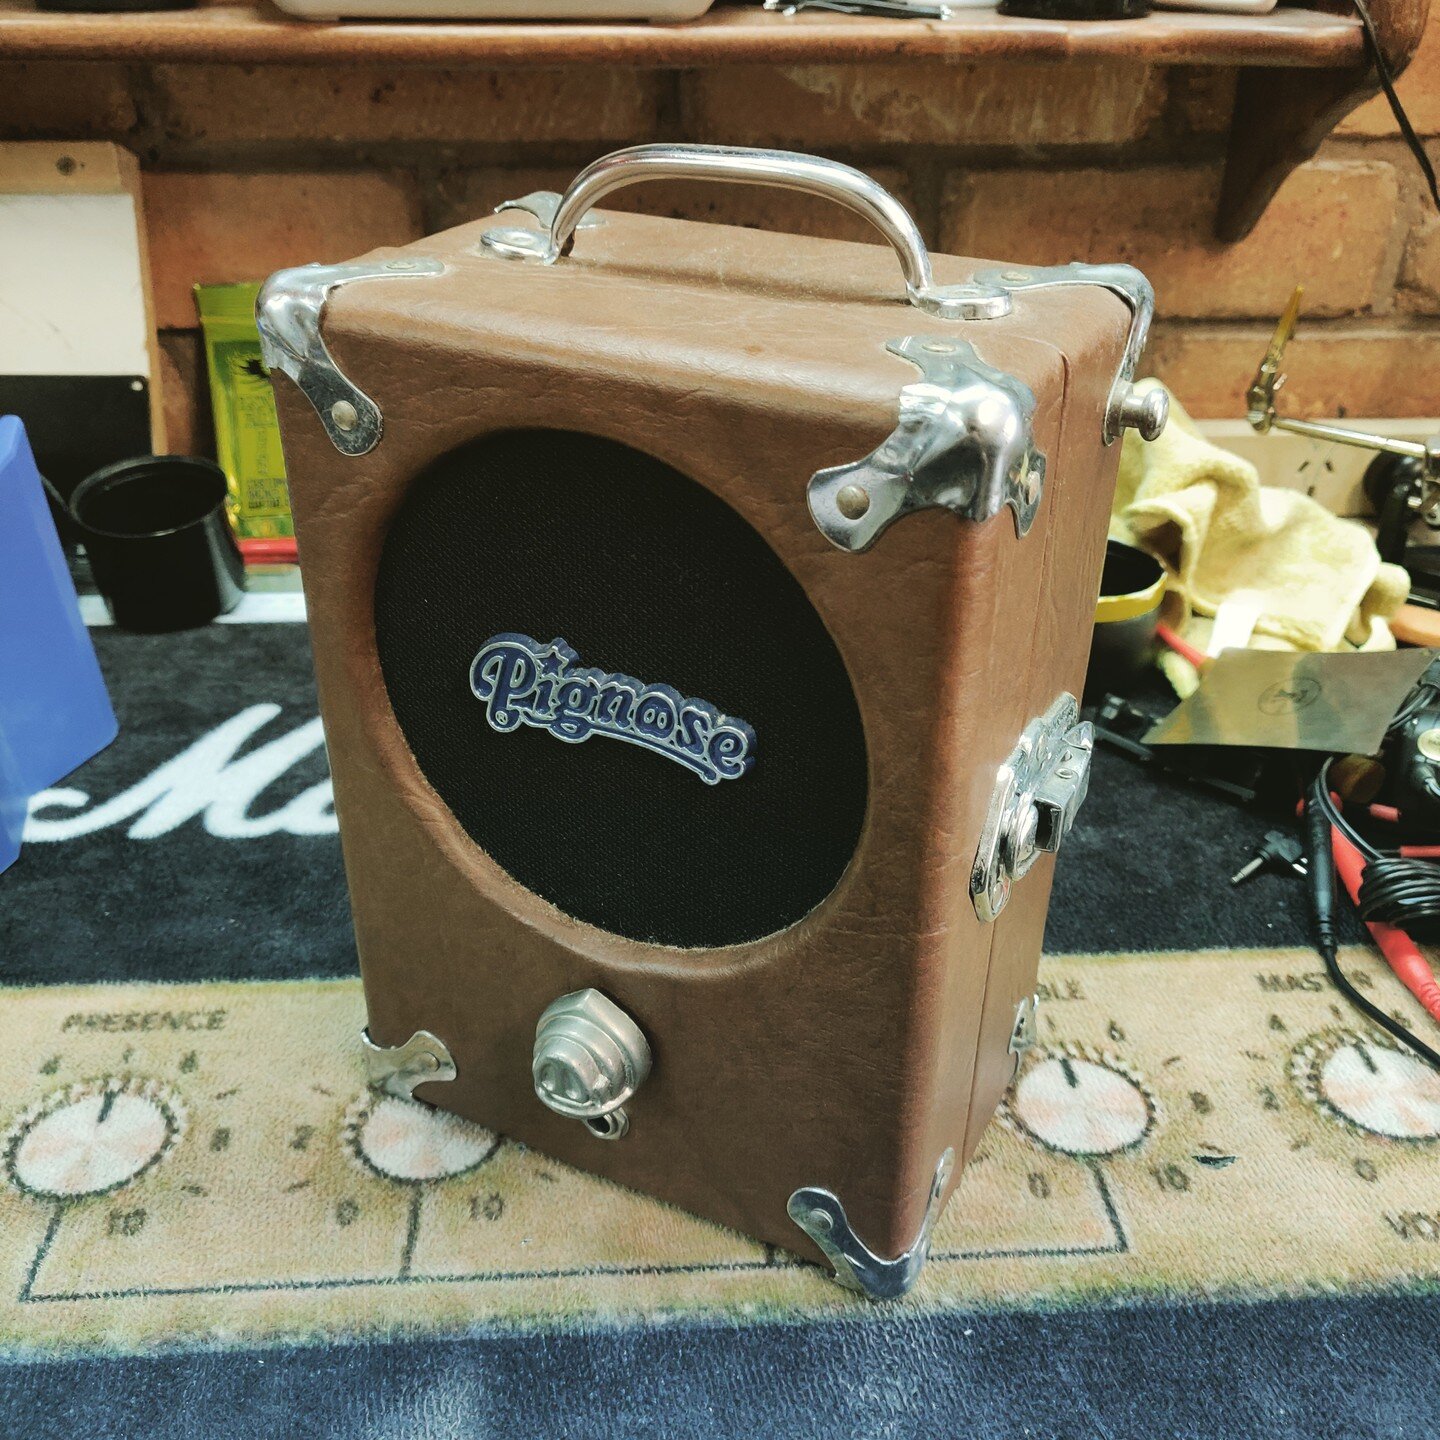 Got the chance to fix one of these little Pignose Practice Amps that wasn't passing signal. They're compact little units - made famous in the 70s by the likes of Paul McCartney, Eric Clapton and Jimmy Page to name a few. Very Cool ✌
.
.
.
.
.
.
.
#we